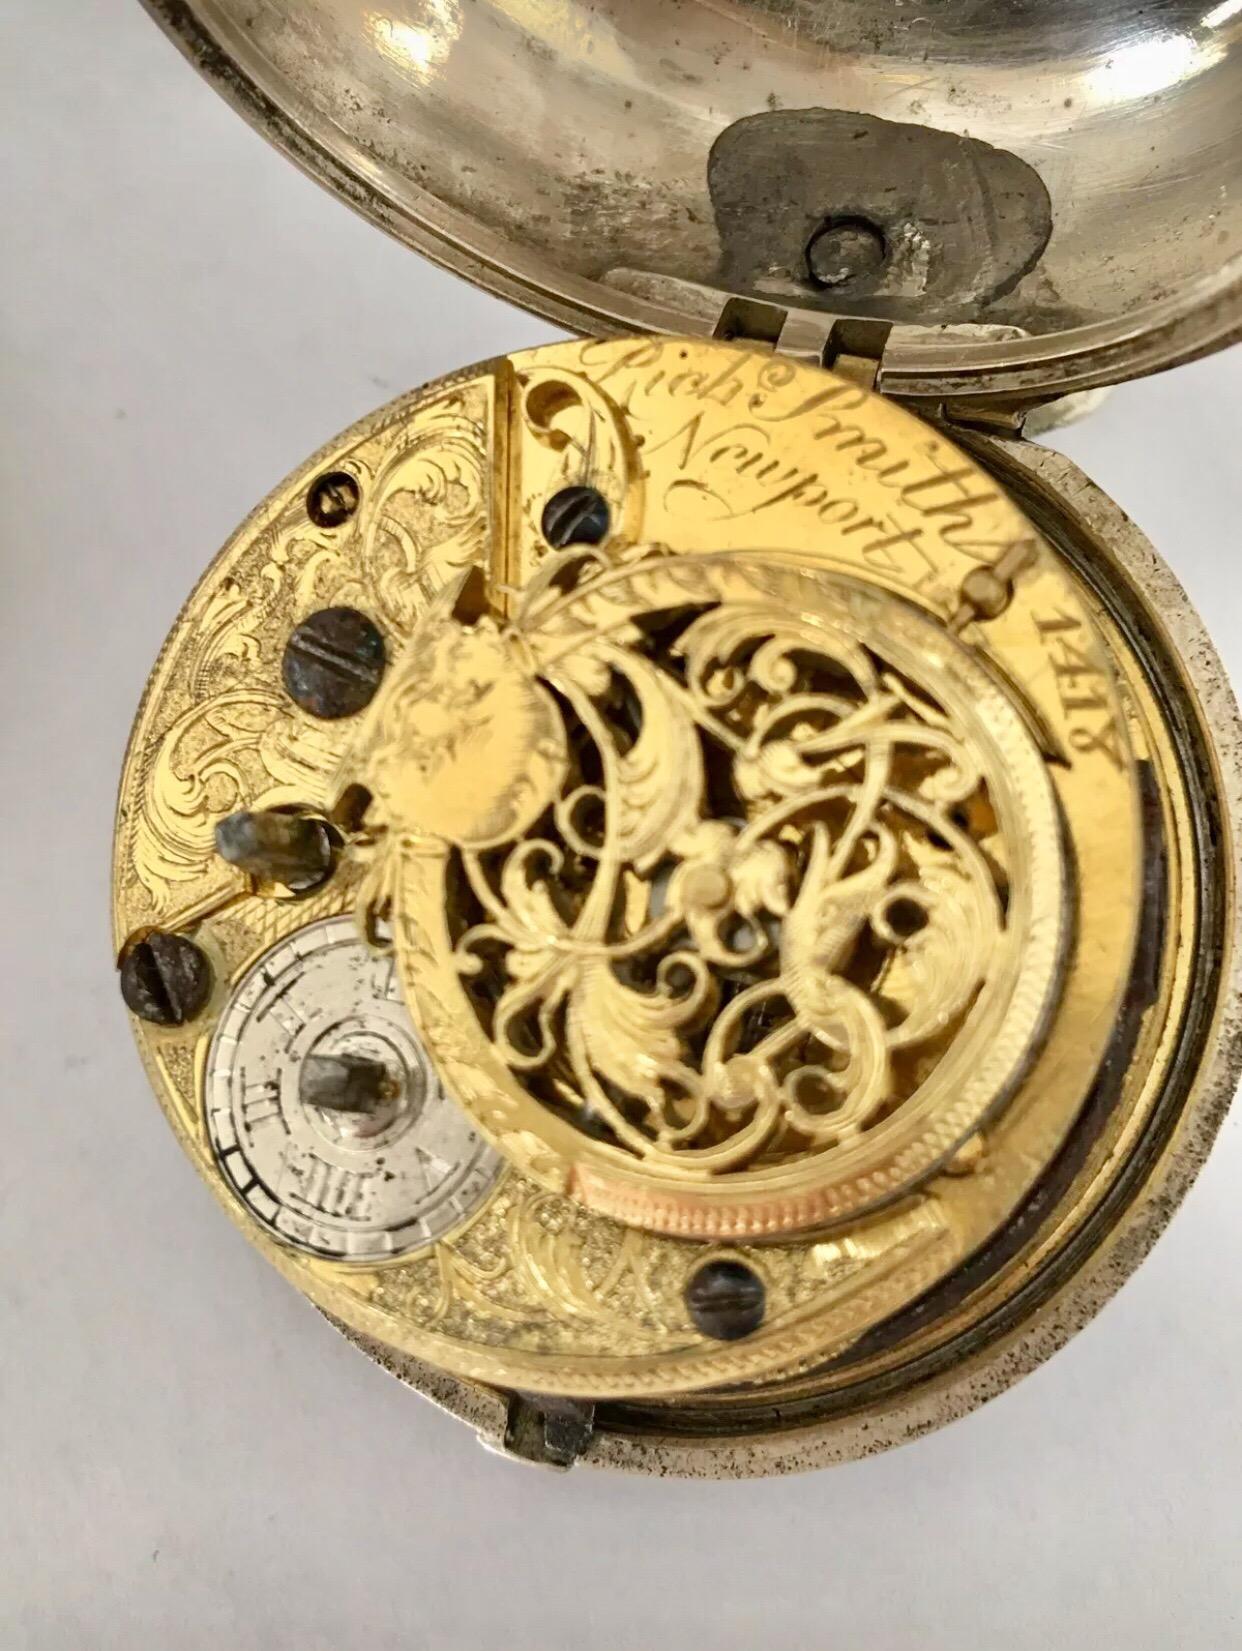 Early Verge English Fusee Pocket Watch Signed Richard Smith, Newport, circa 1730 1